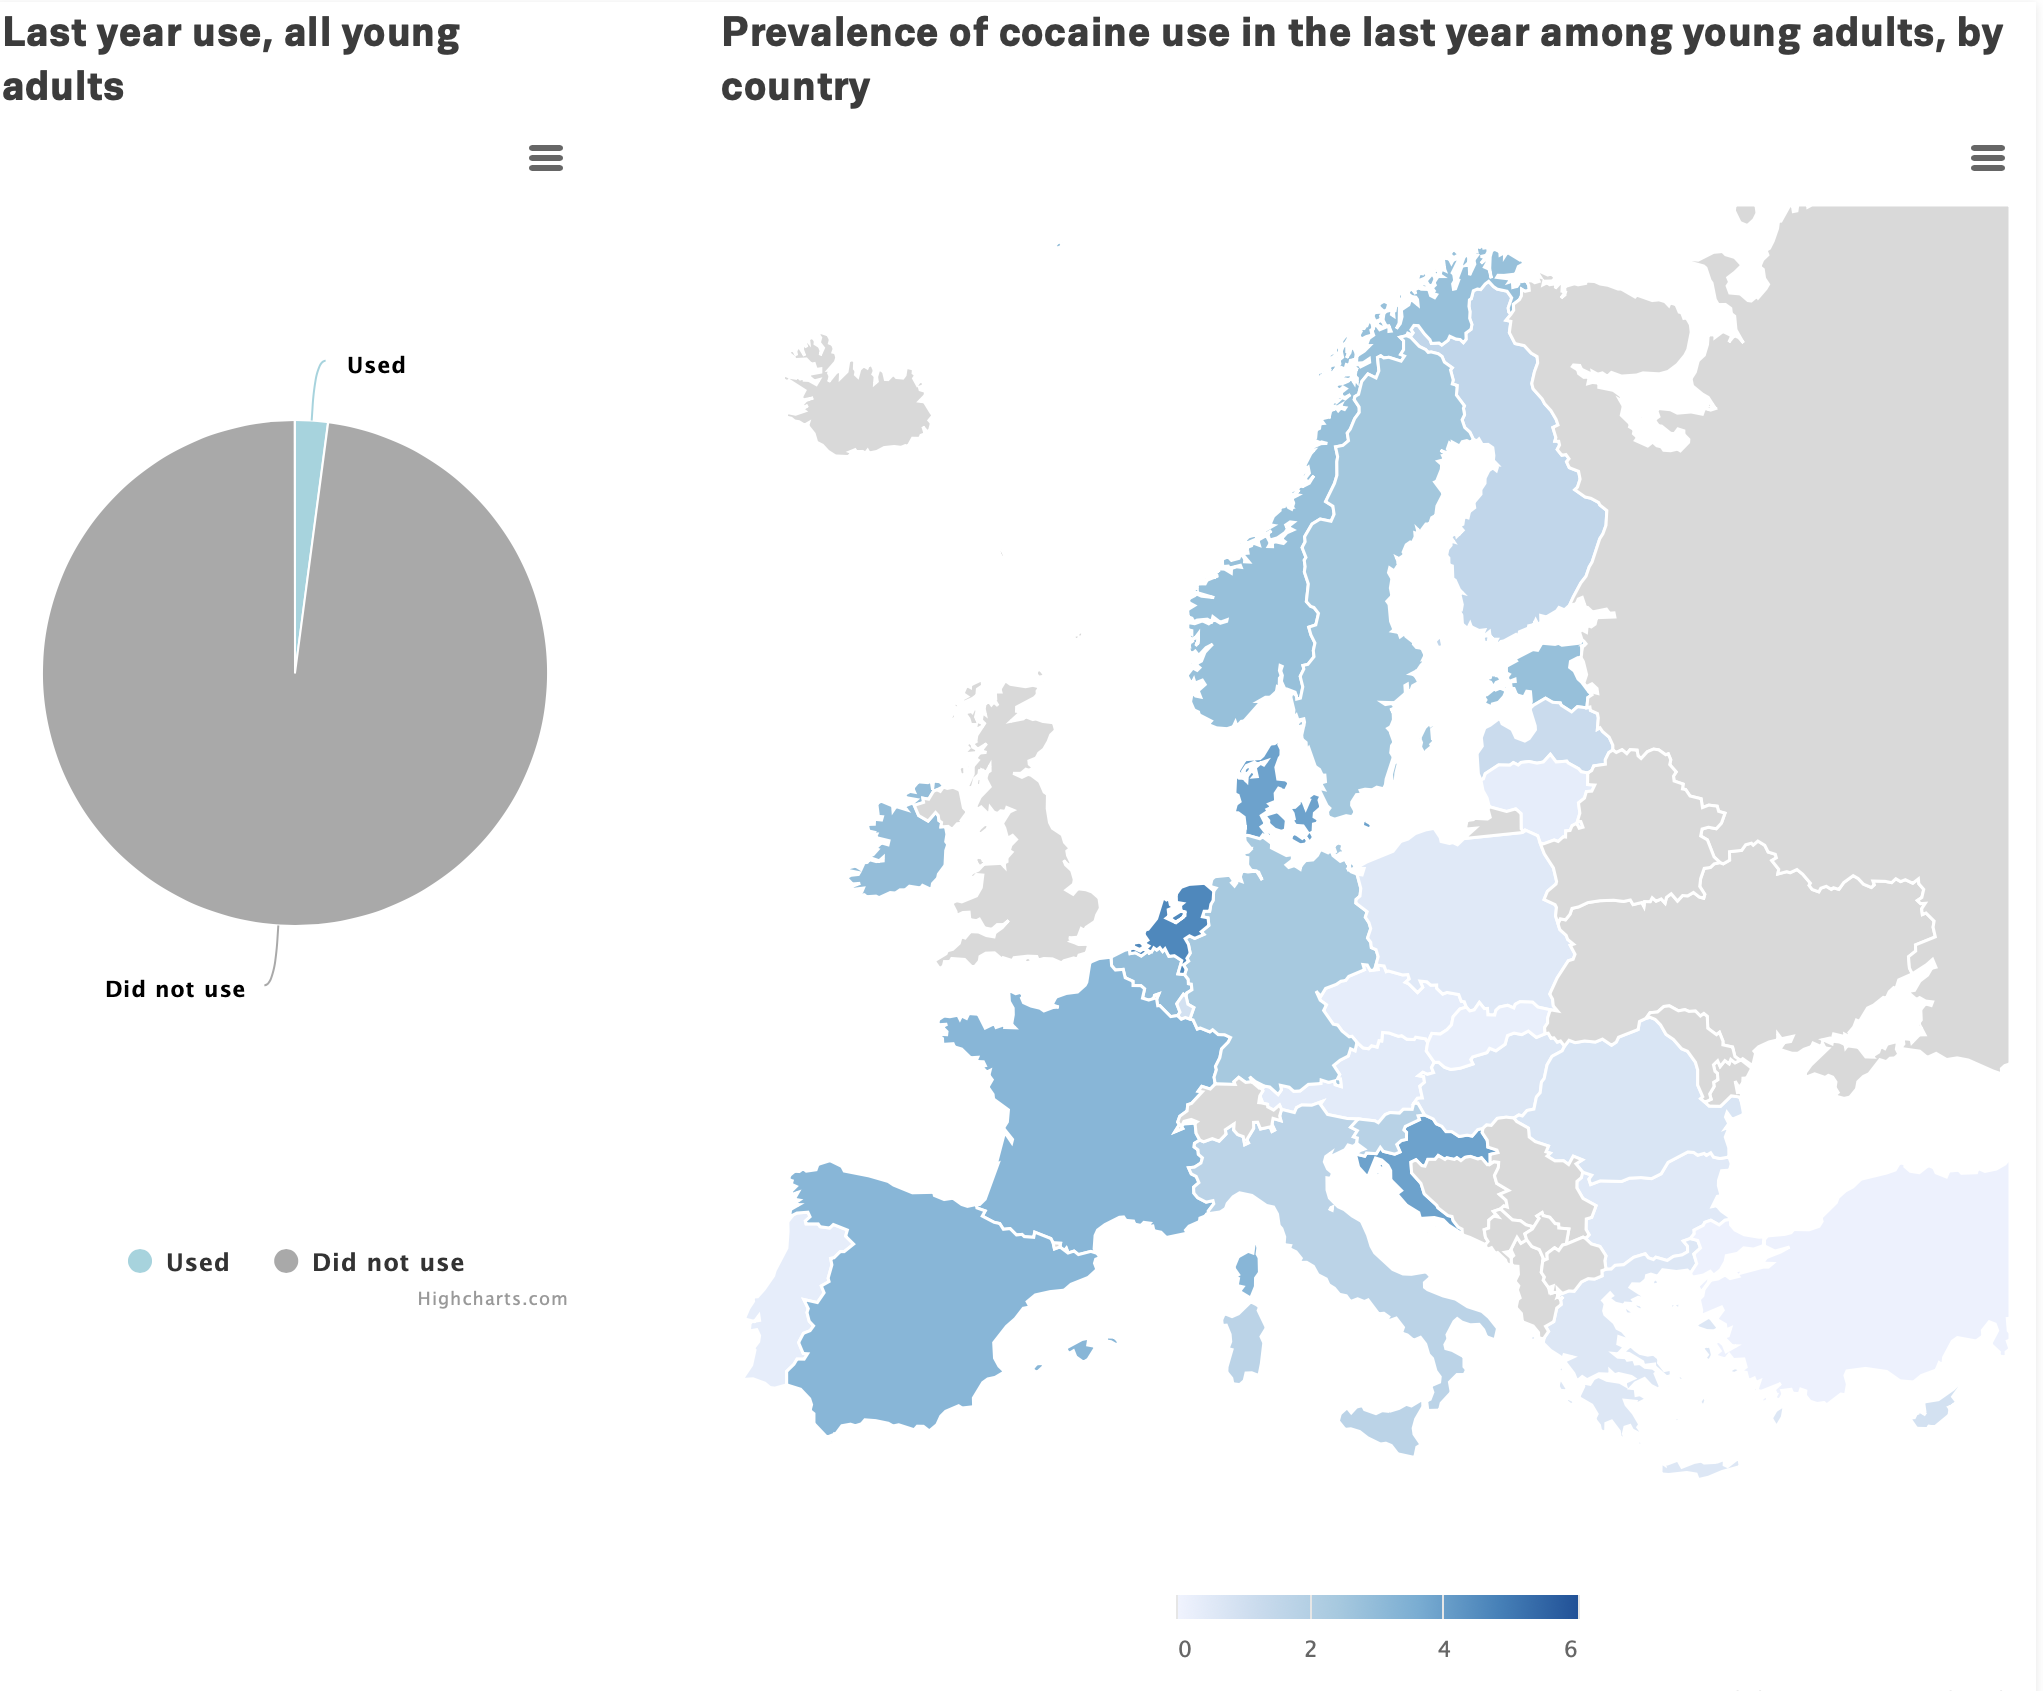 While last year cocaine use among young people is low, in many countries in Europe it is close to 3%. 